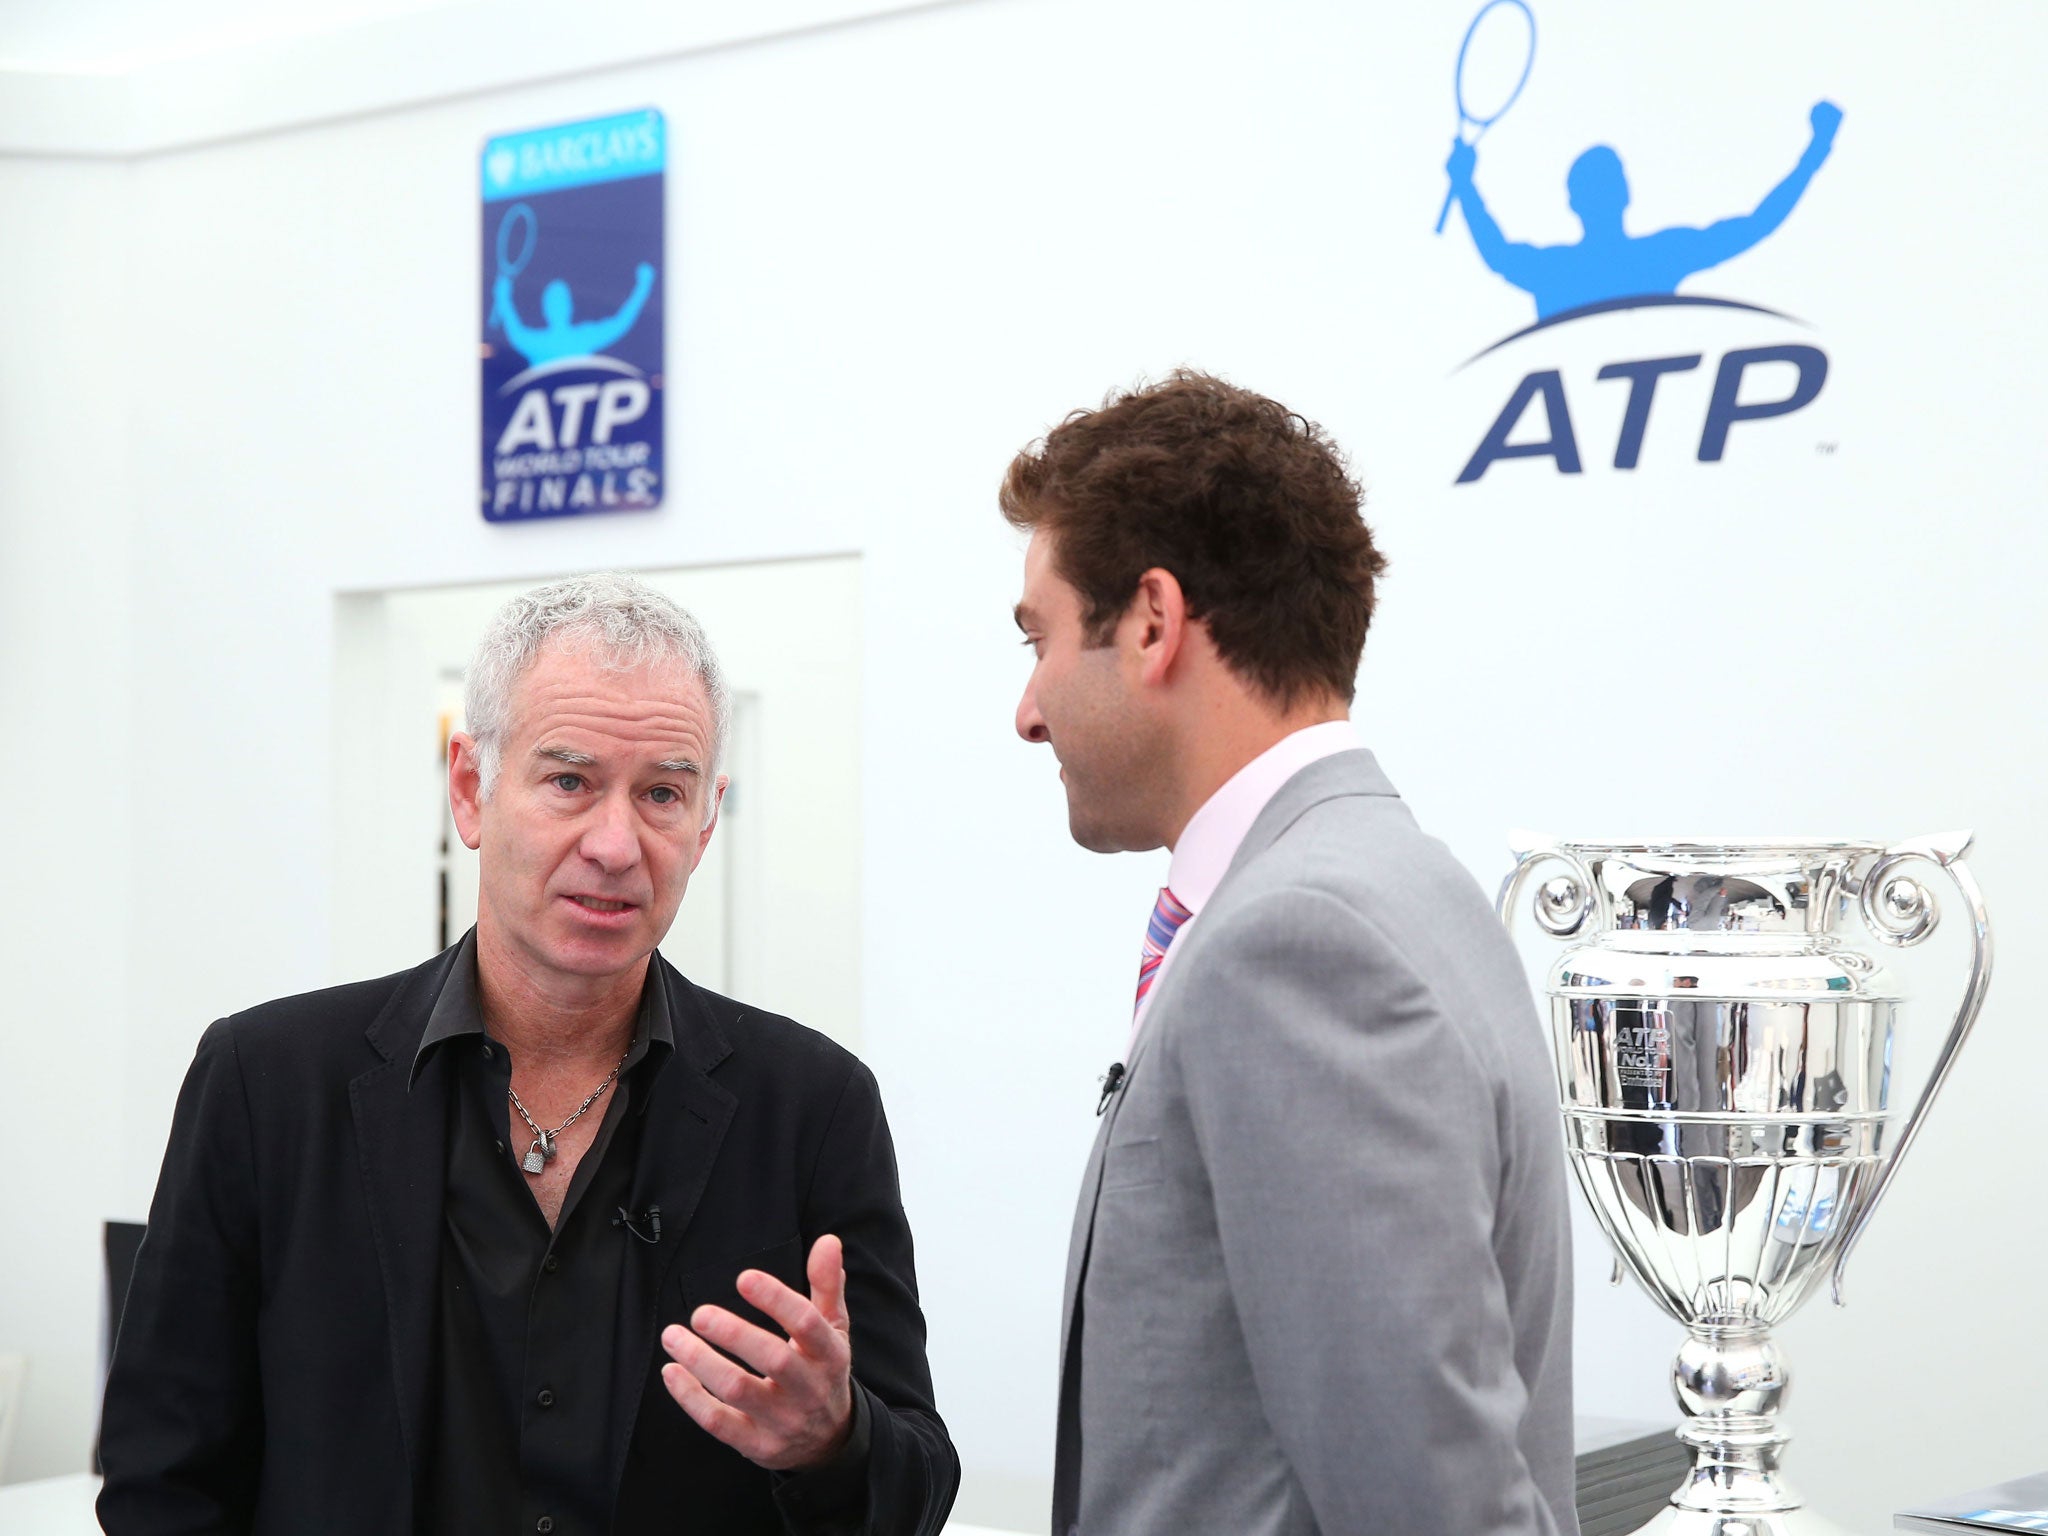 &#13;
John McEnroe, left, is to aid Raonic on a consultancy basis &#13;